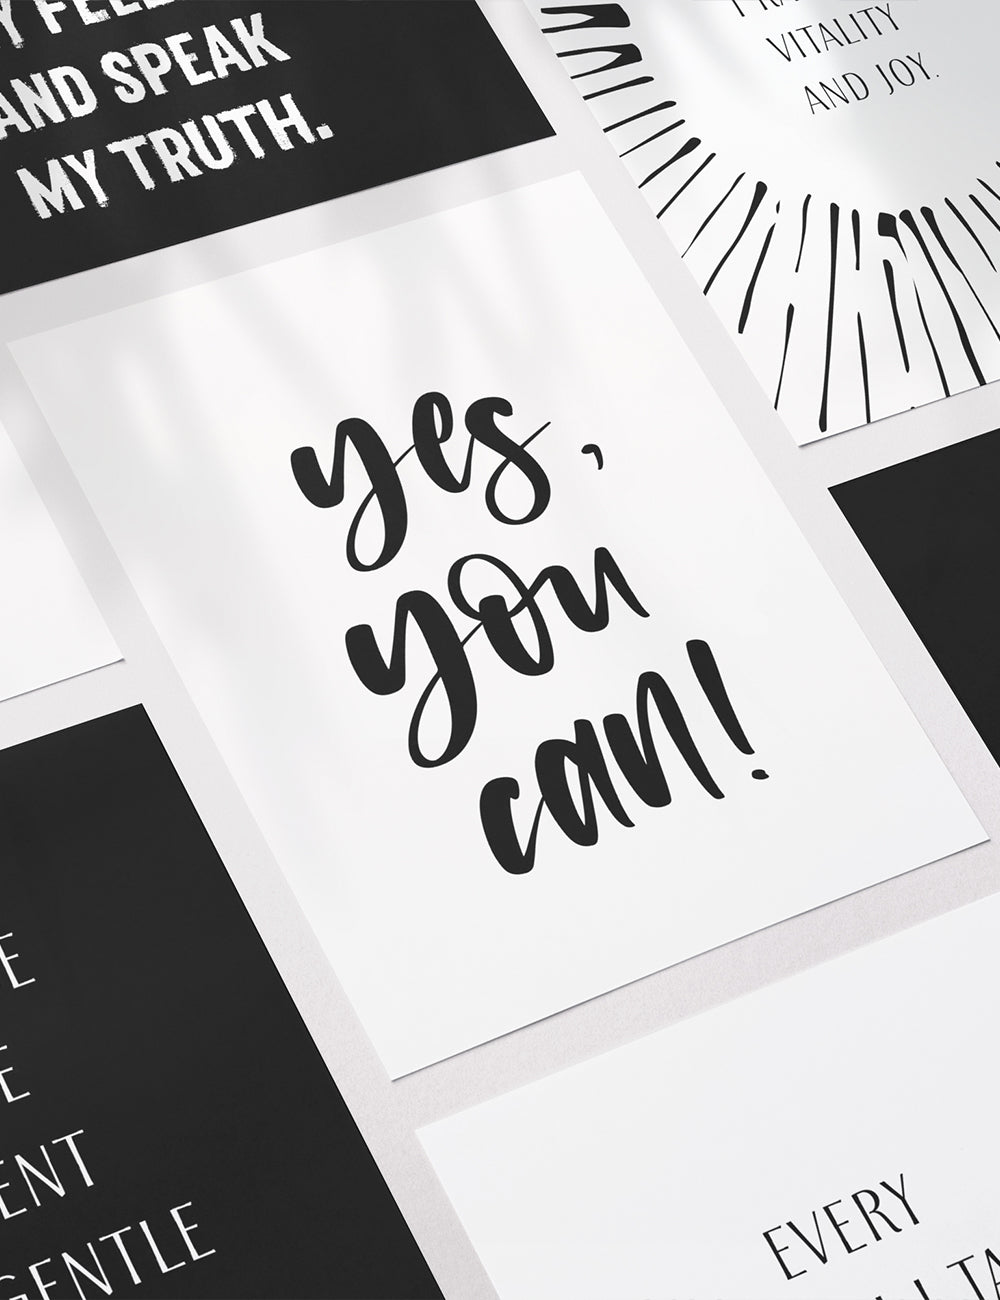 Vision Board Printables | Printable Vision Board Kit | Printable Affirmation Cards | Inspirational & Motivational Quotes | Printable Quotes | Printable Journal & Planner Cards | 3.5x5 | 3x4 | 2x3 | PDF + JPEG | Planner Printables | Planner Accessories | Black and White | Clean Design | Minimal Aesthetic